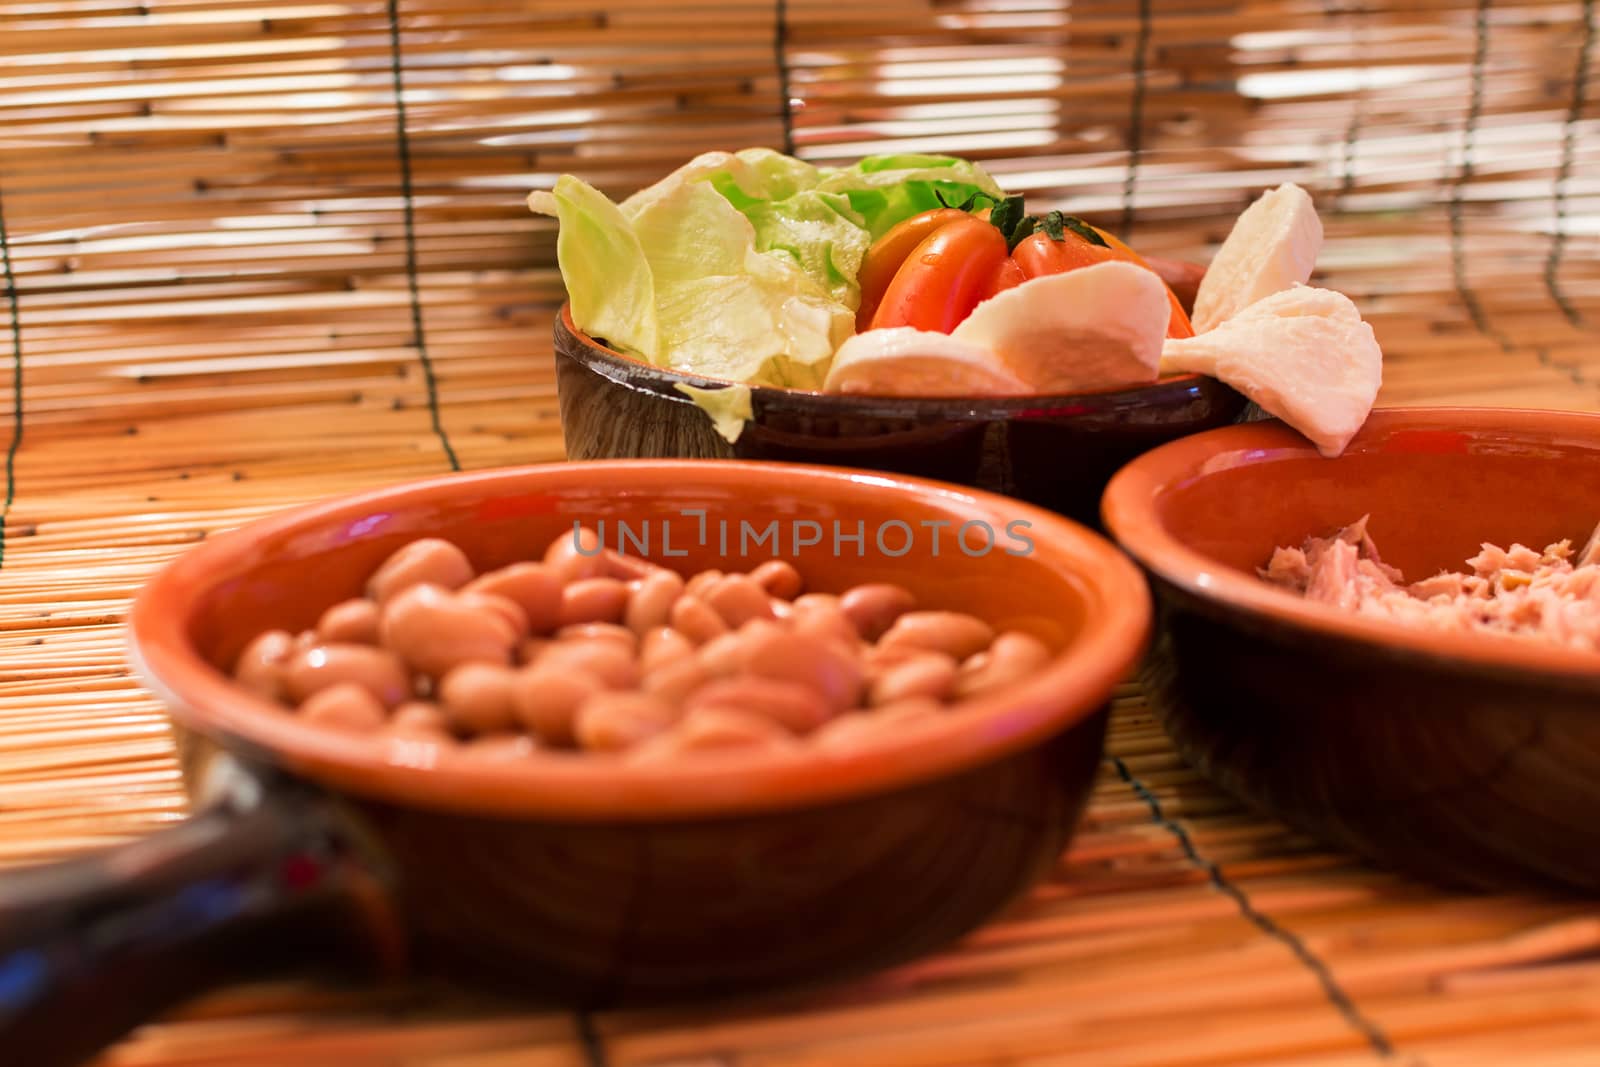 Set of three bowls with salad, beans and tuna